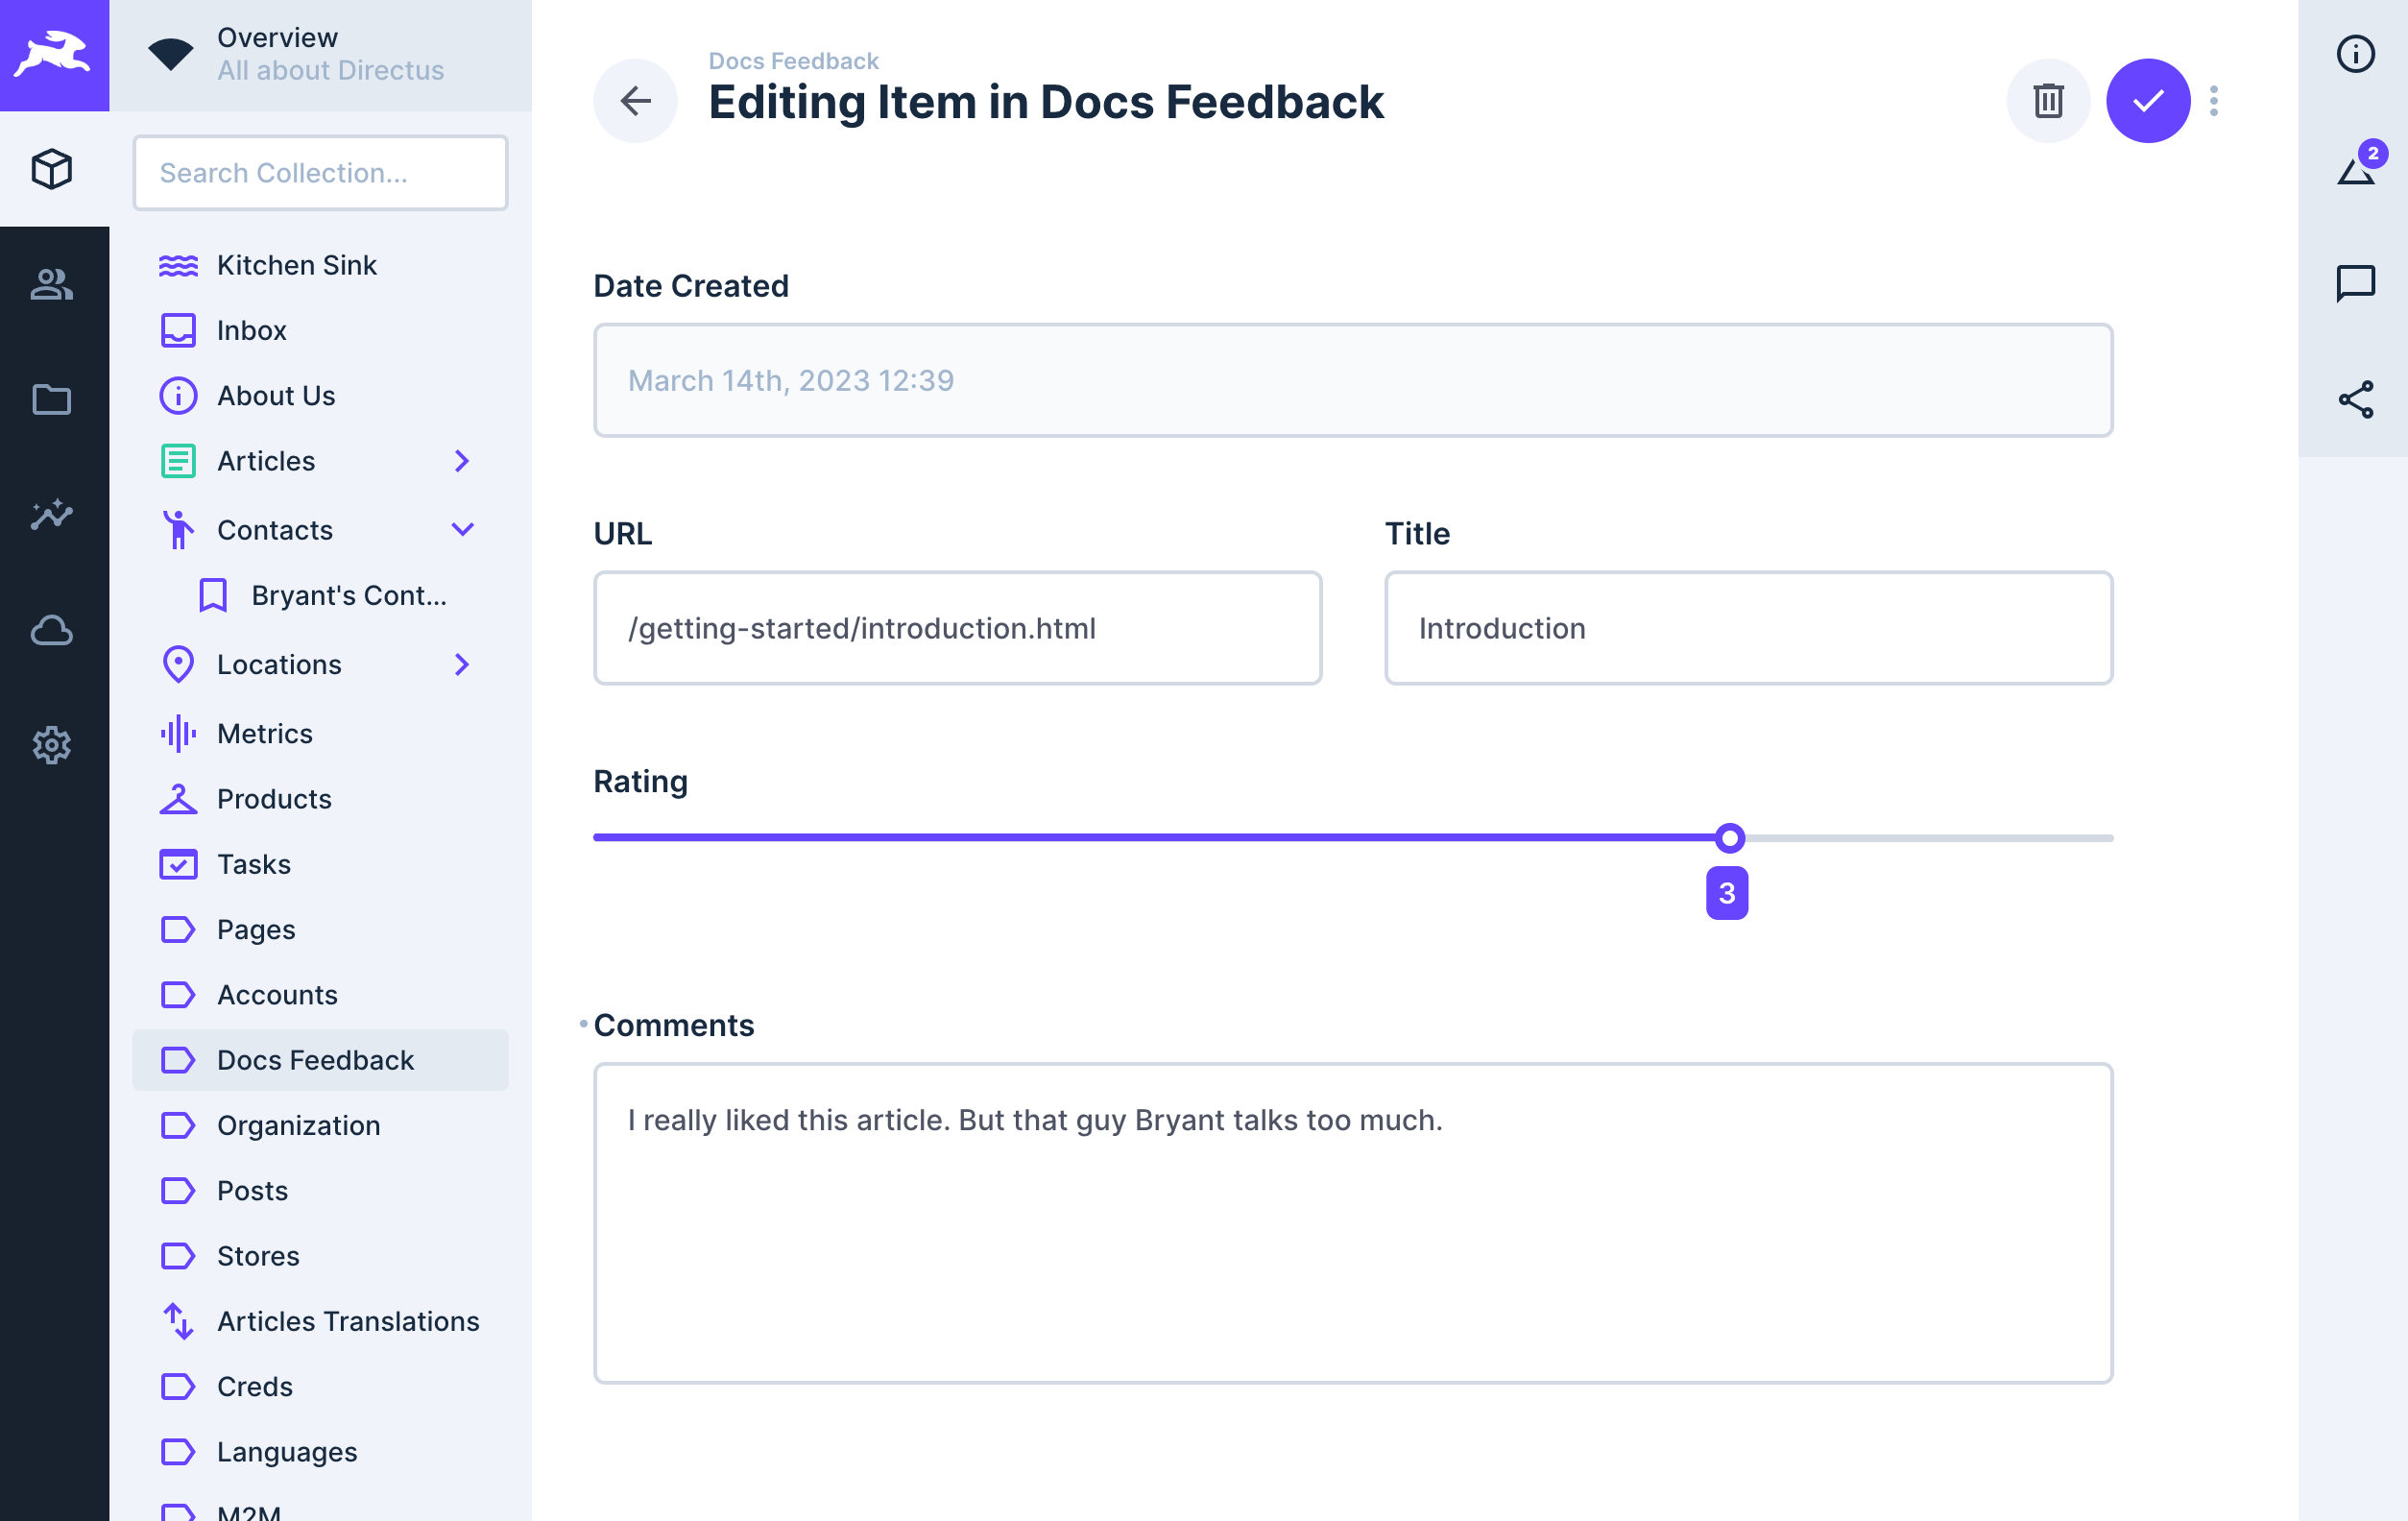 A Directus detail page for the an item in docs_feedback collection